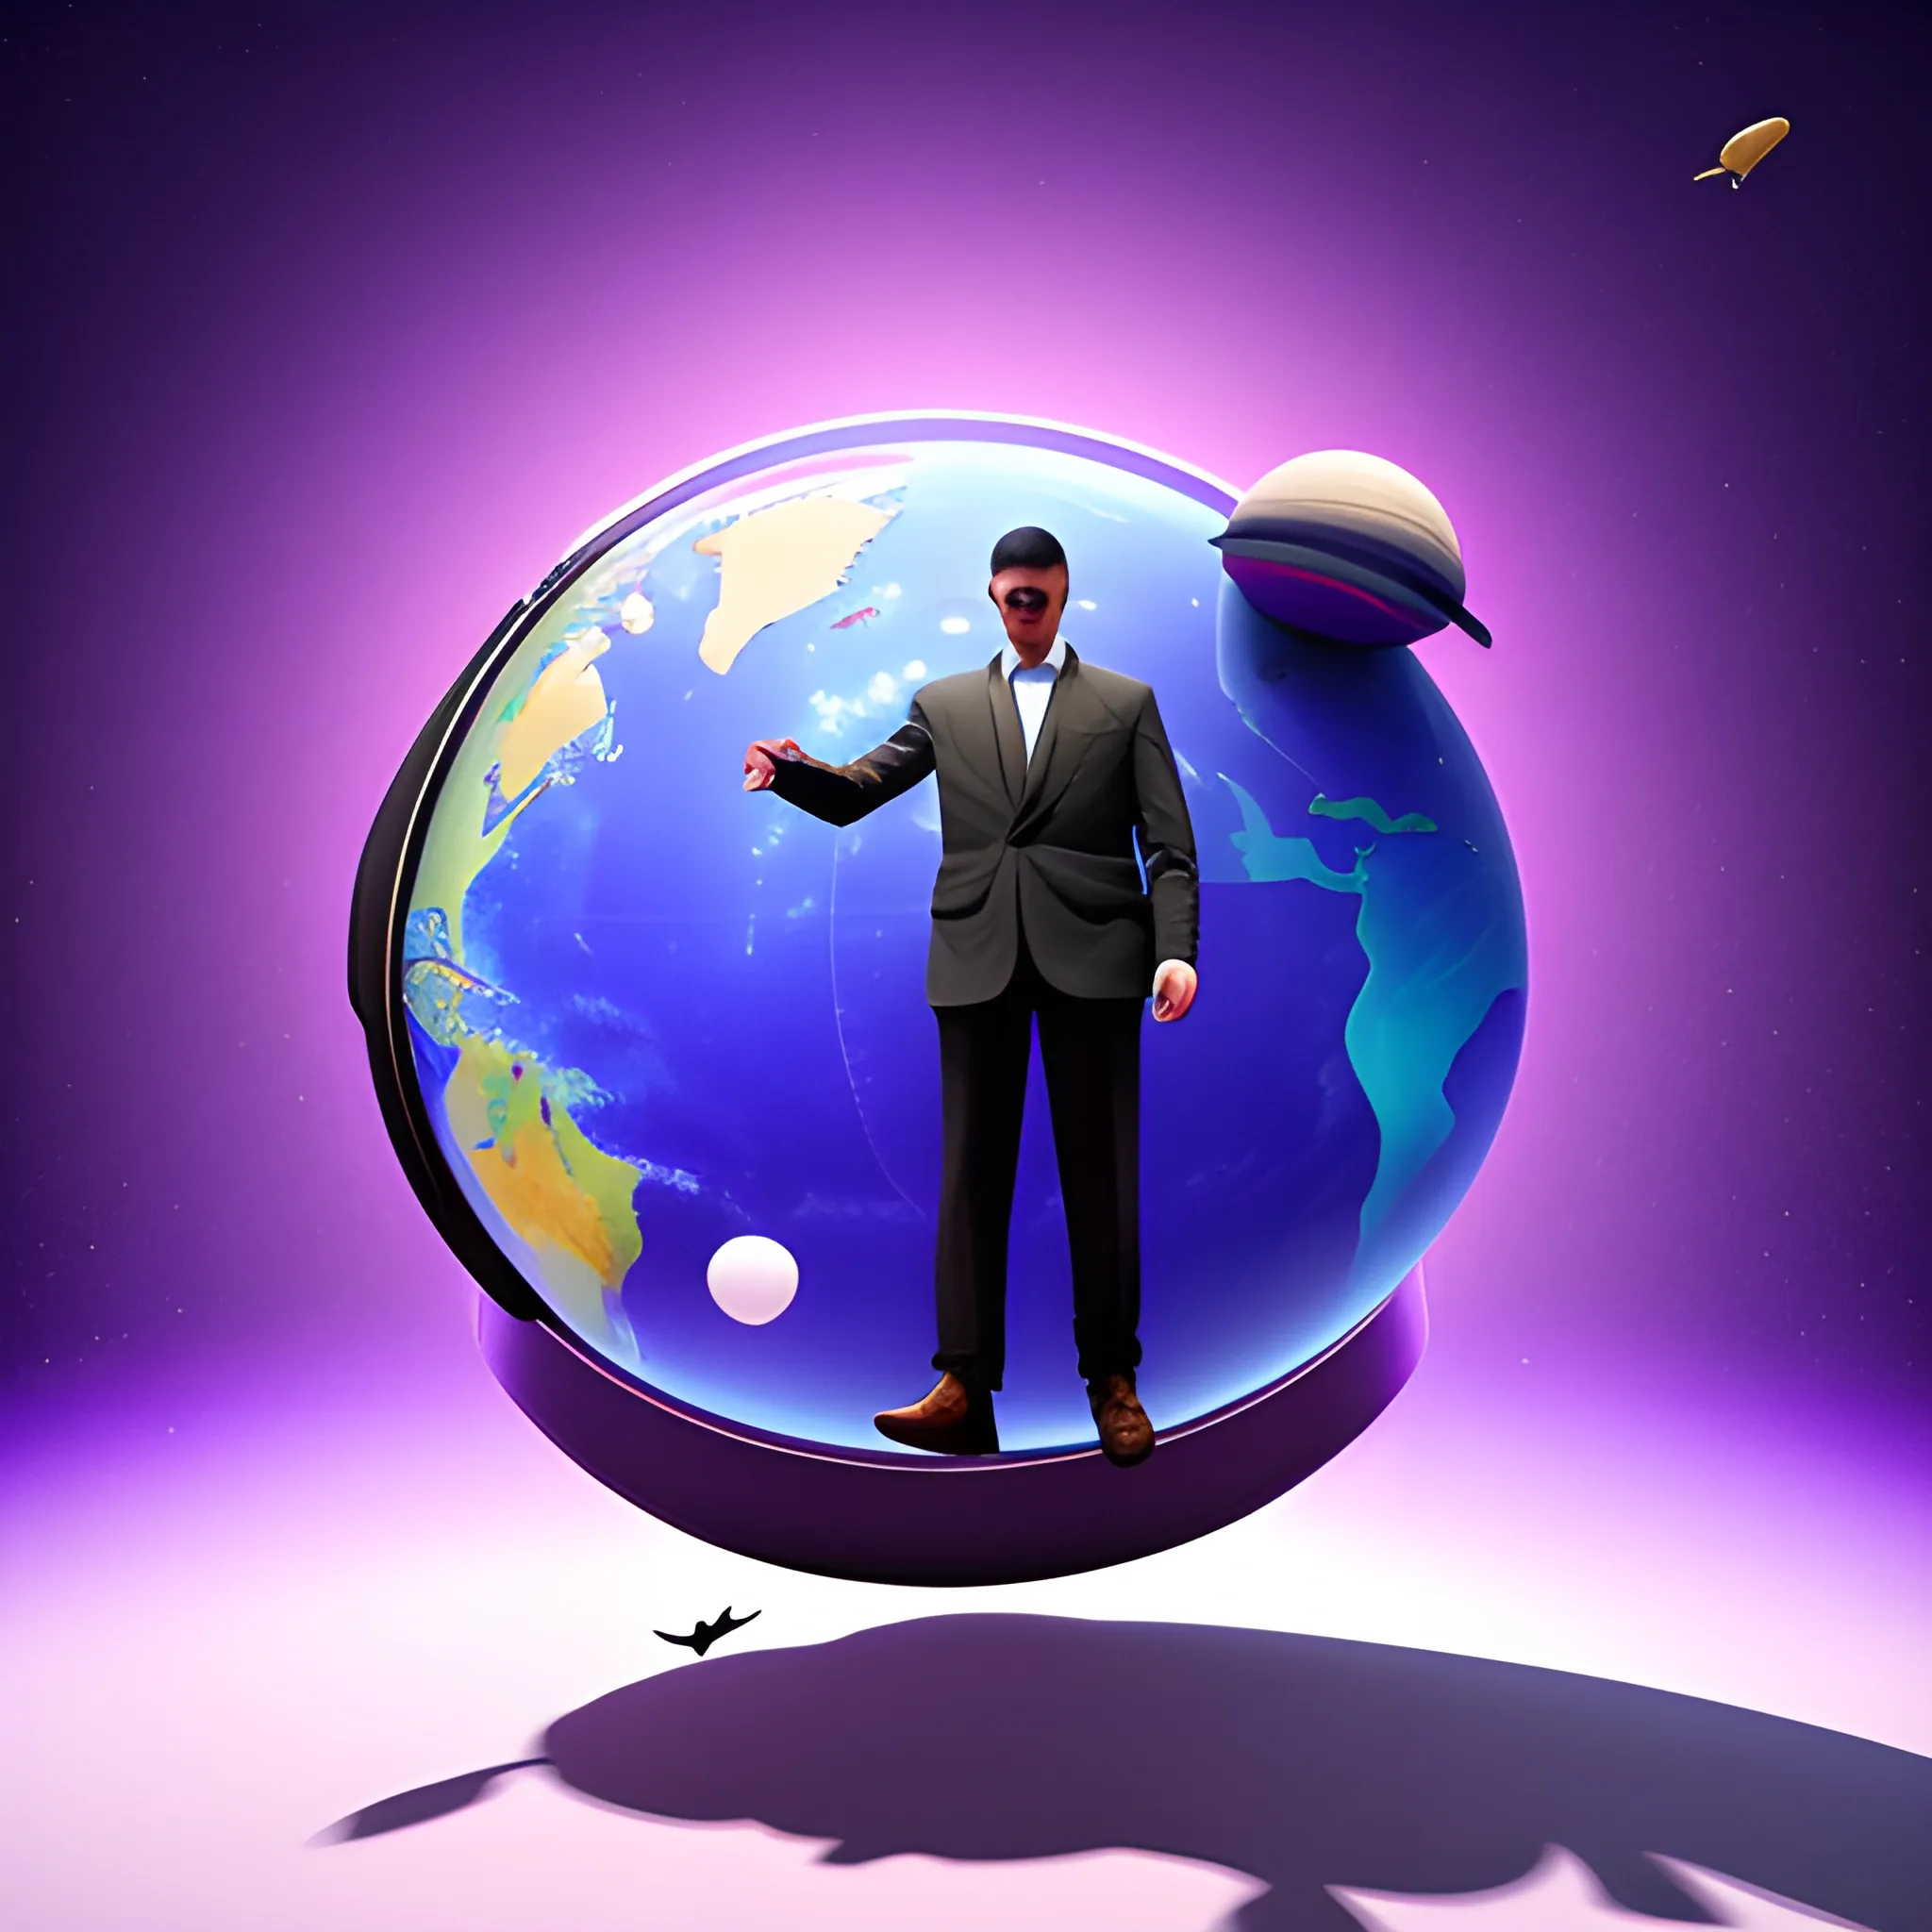 planet earth in a flat view, a man with a suitcase is standing on it, with a restrained look, birds are flying above him, all this is depicted on a purple restrained background , 3D, Trippy, 3D, Trippy